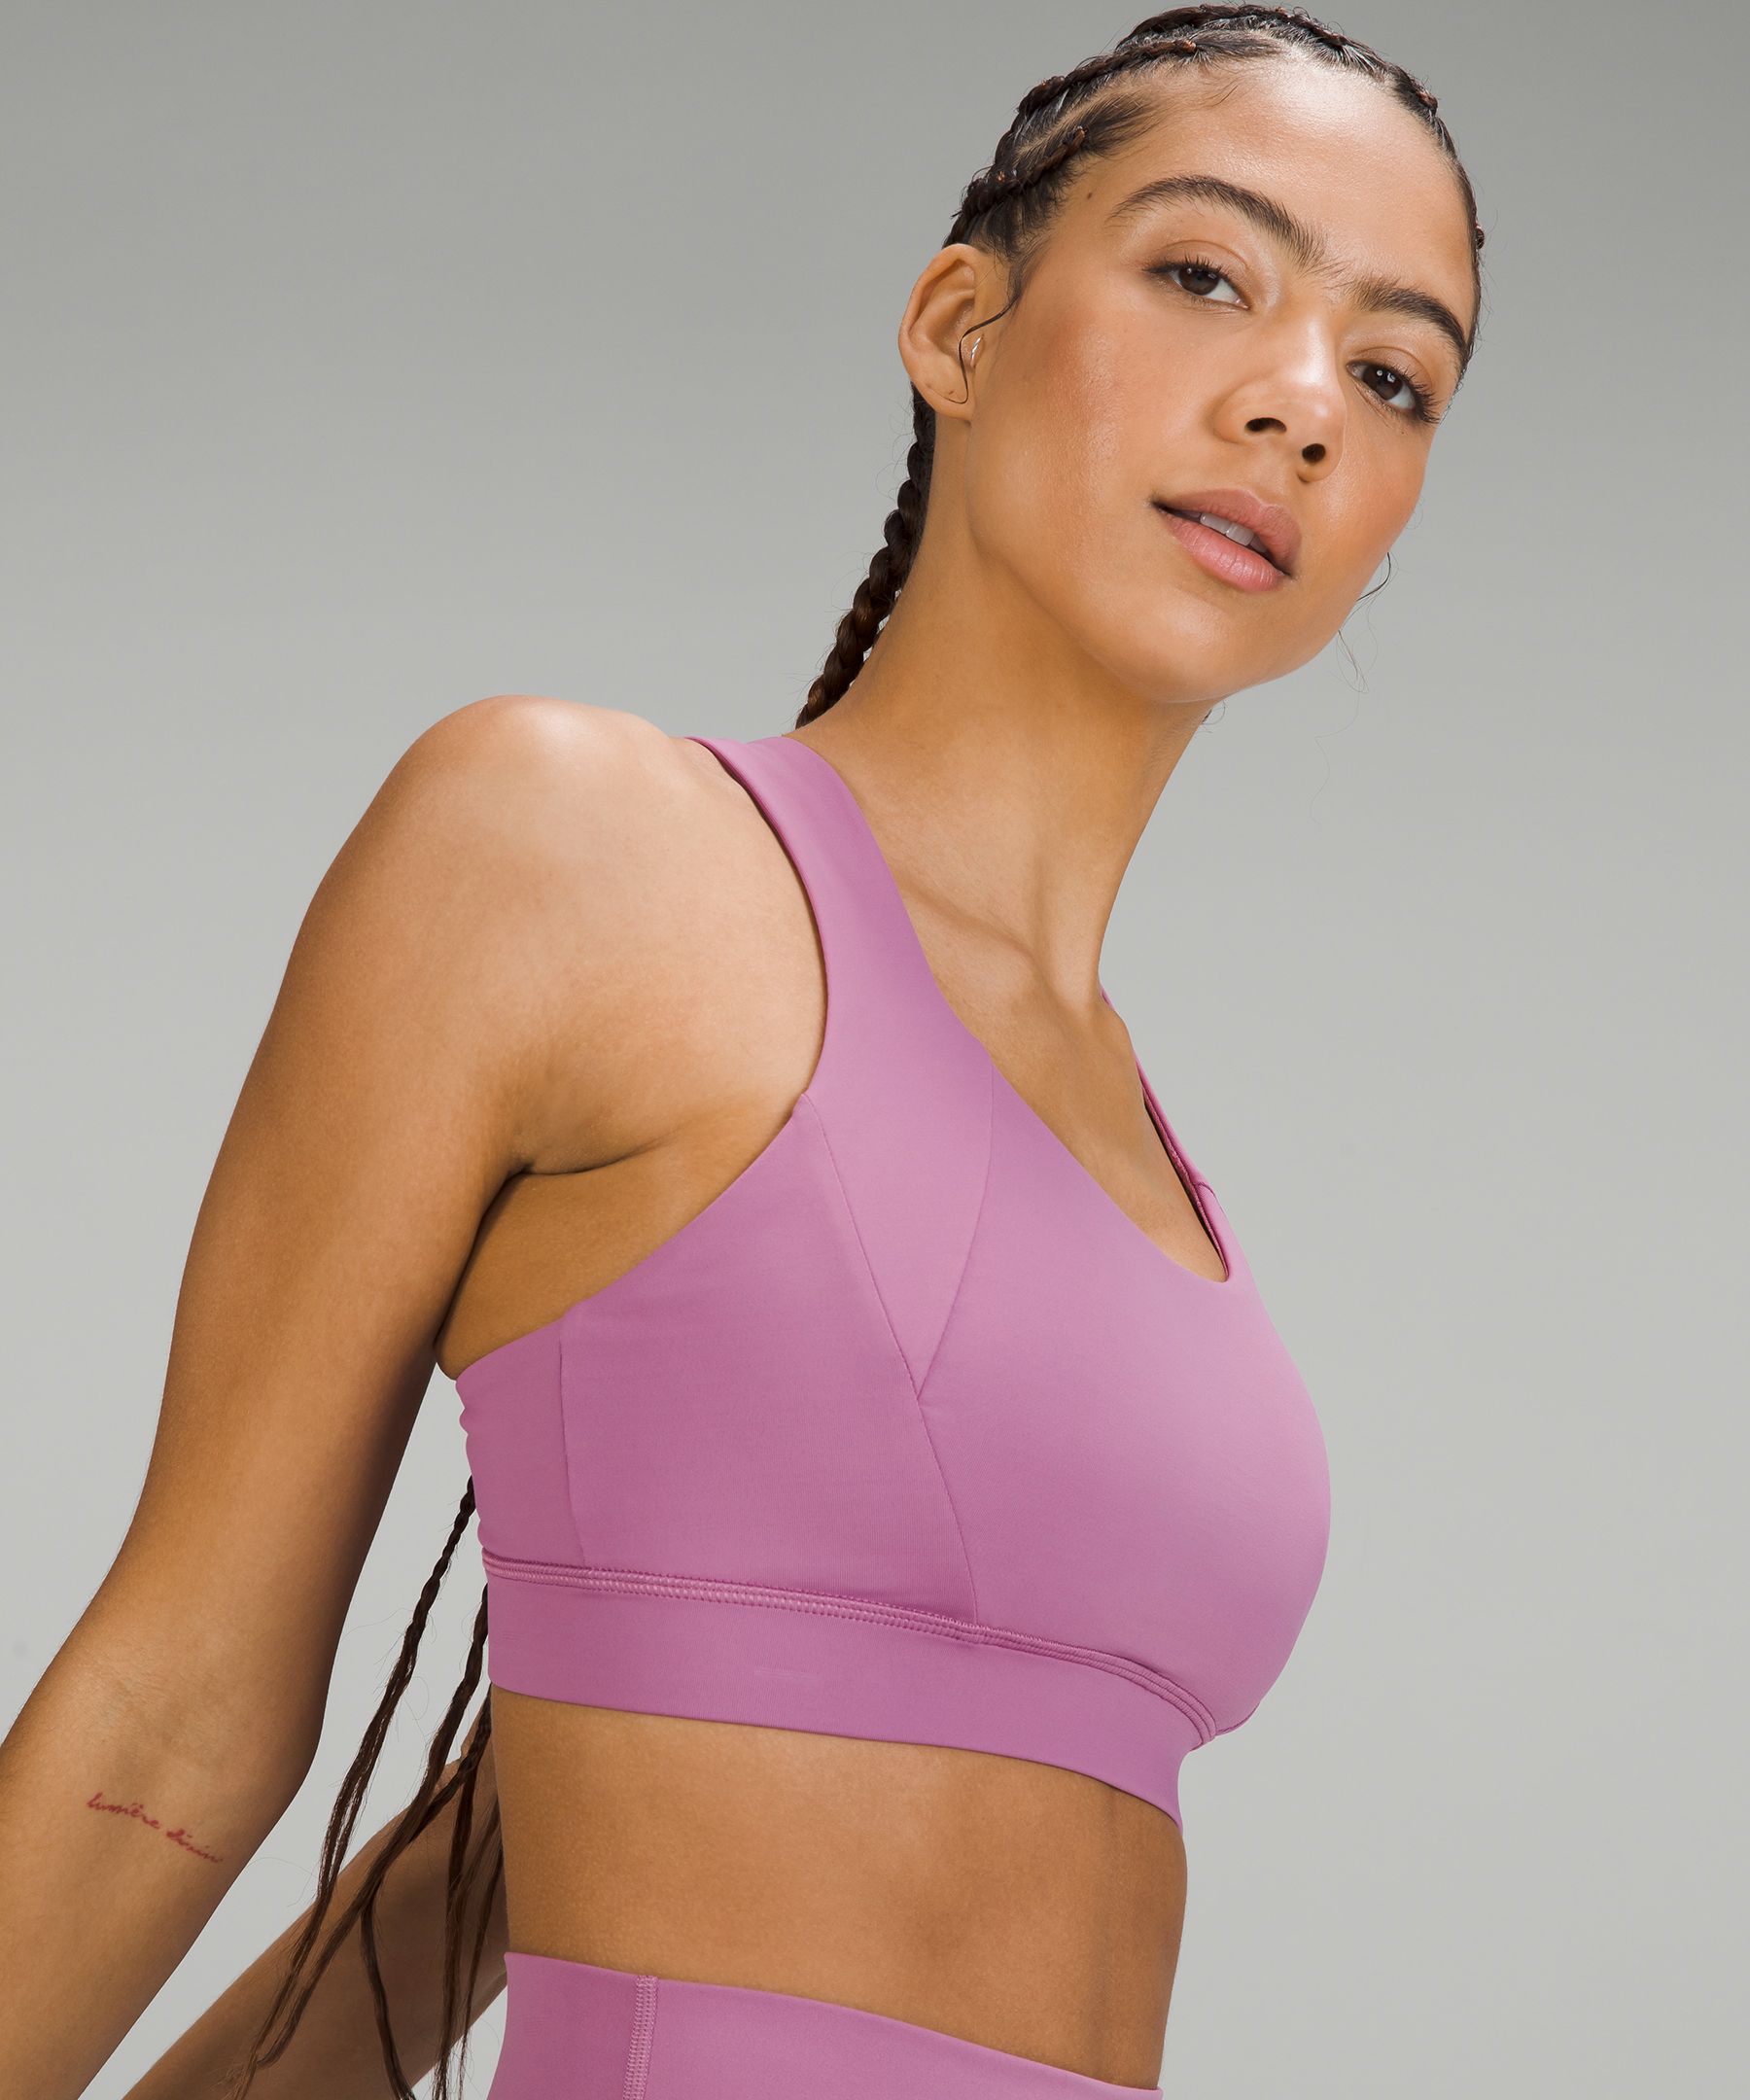 Free To Be Elevated Bra Light Support, Dd/Ddd(E) Cup